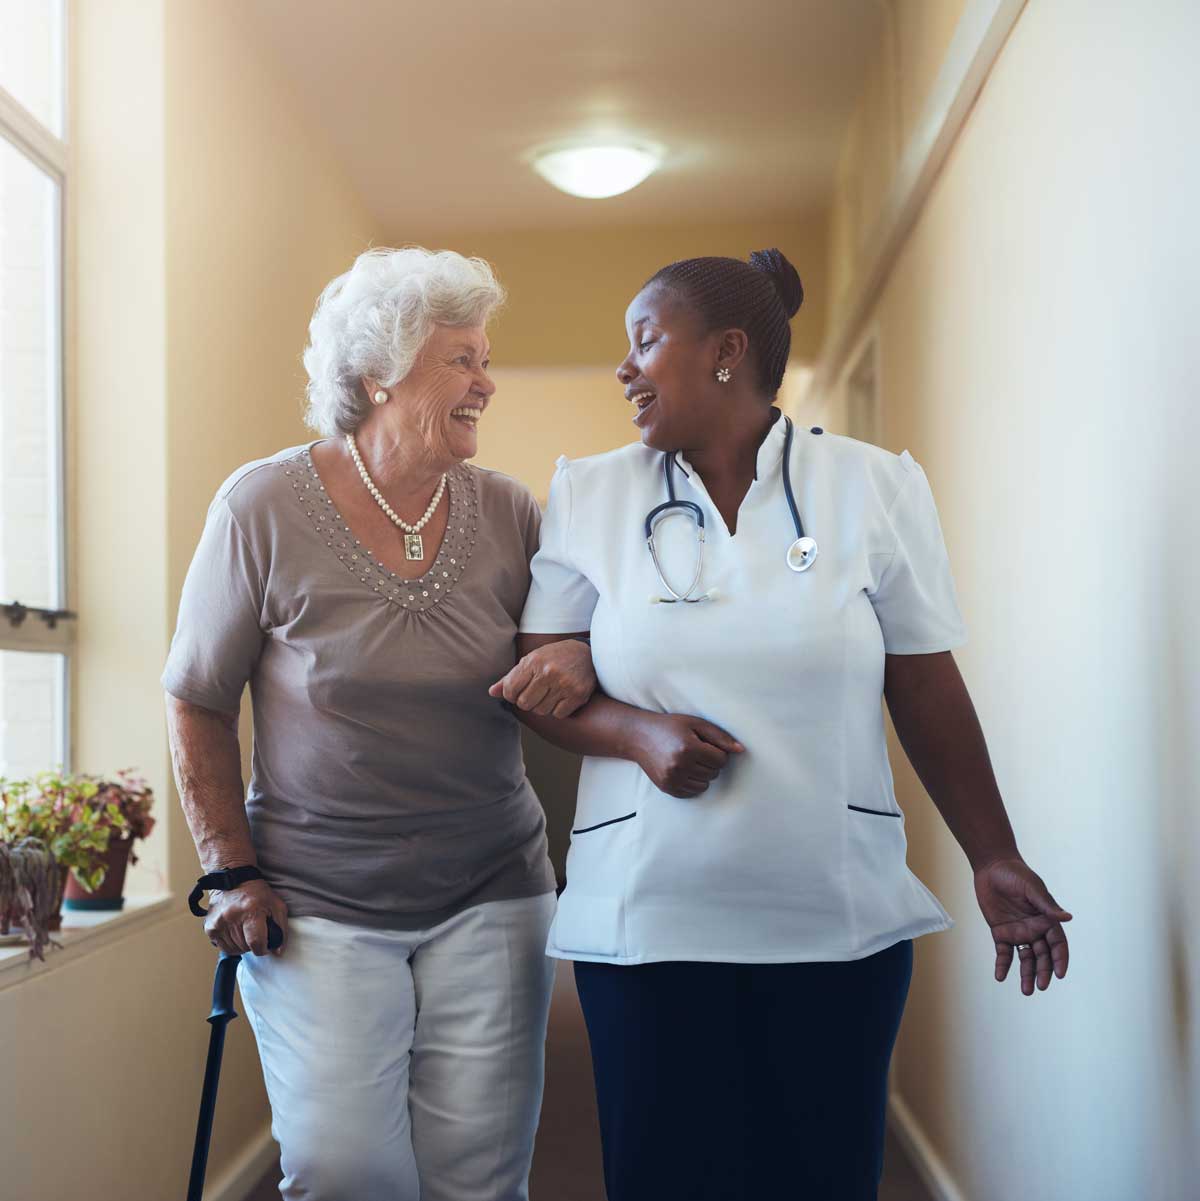 Smiling healthcare worker and senior woman walking together